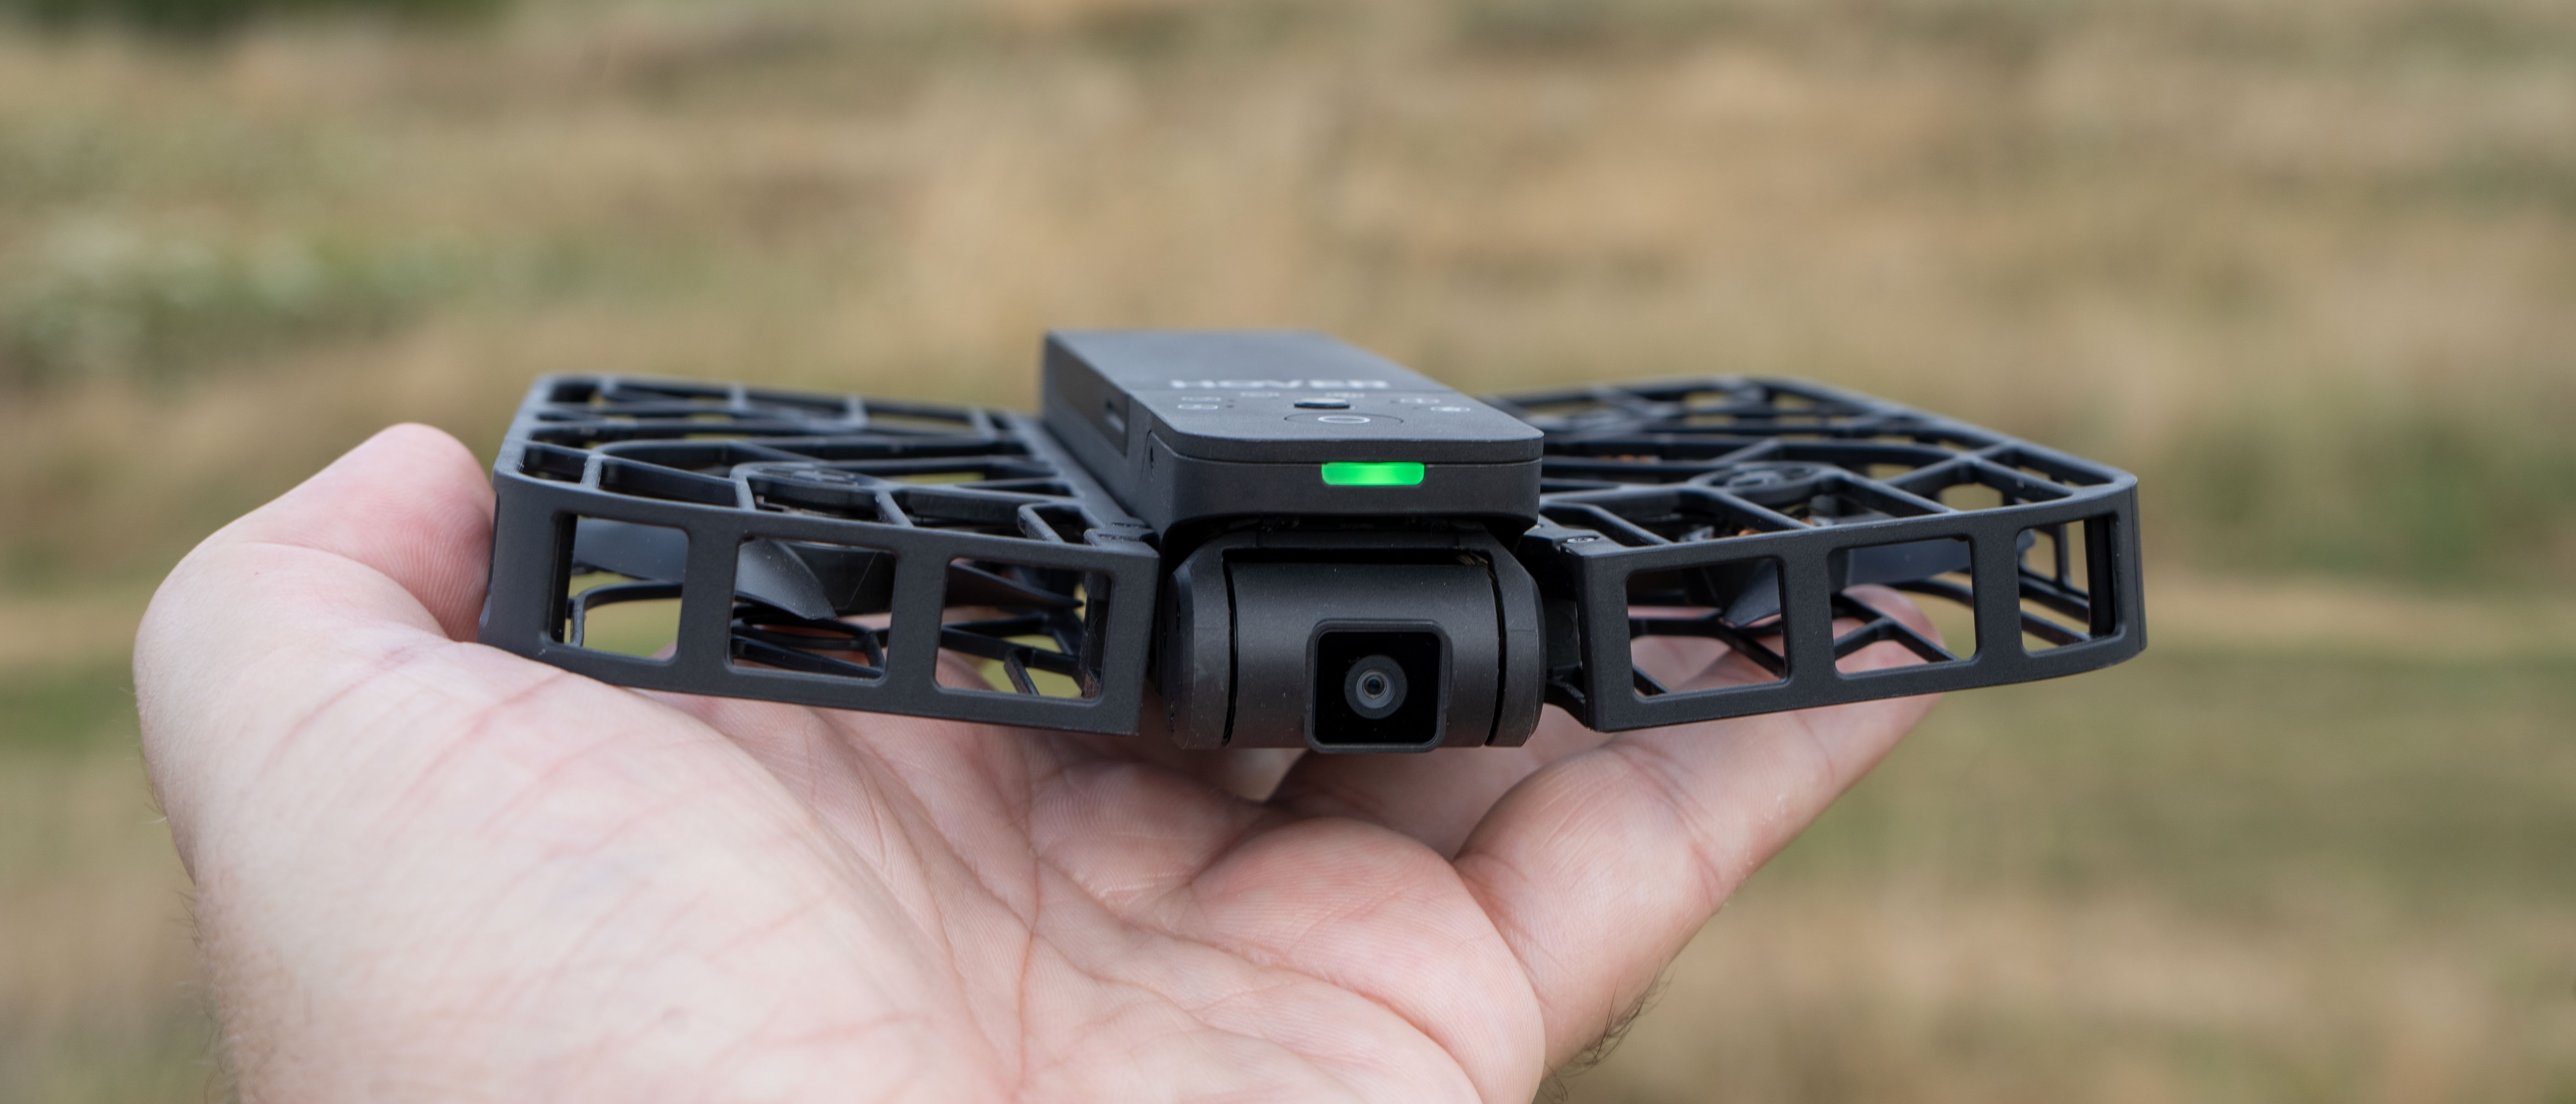 HOVERAir X1 to Transform Aerial Photography